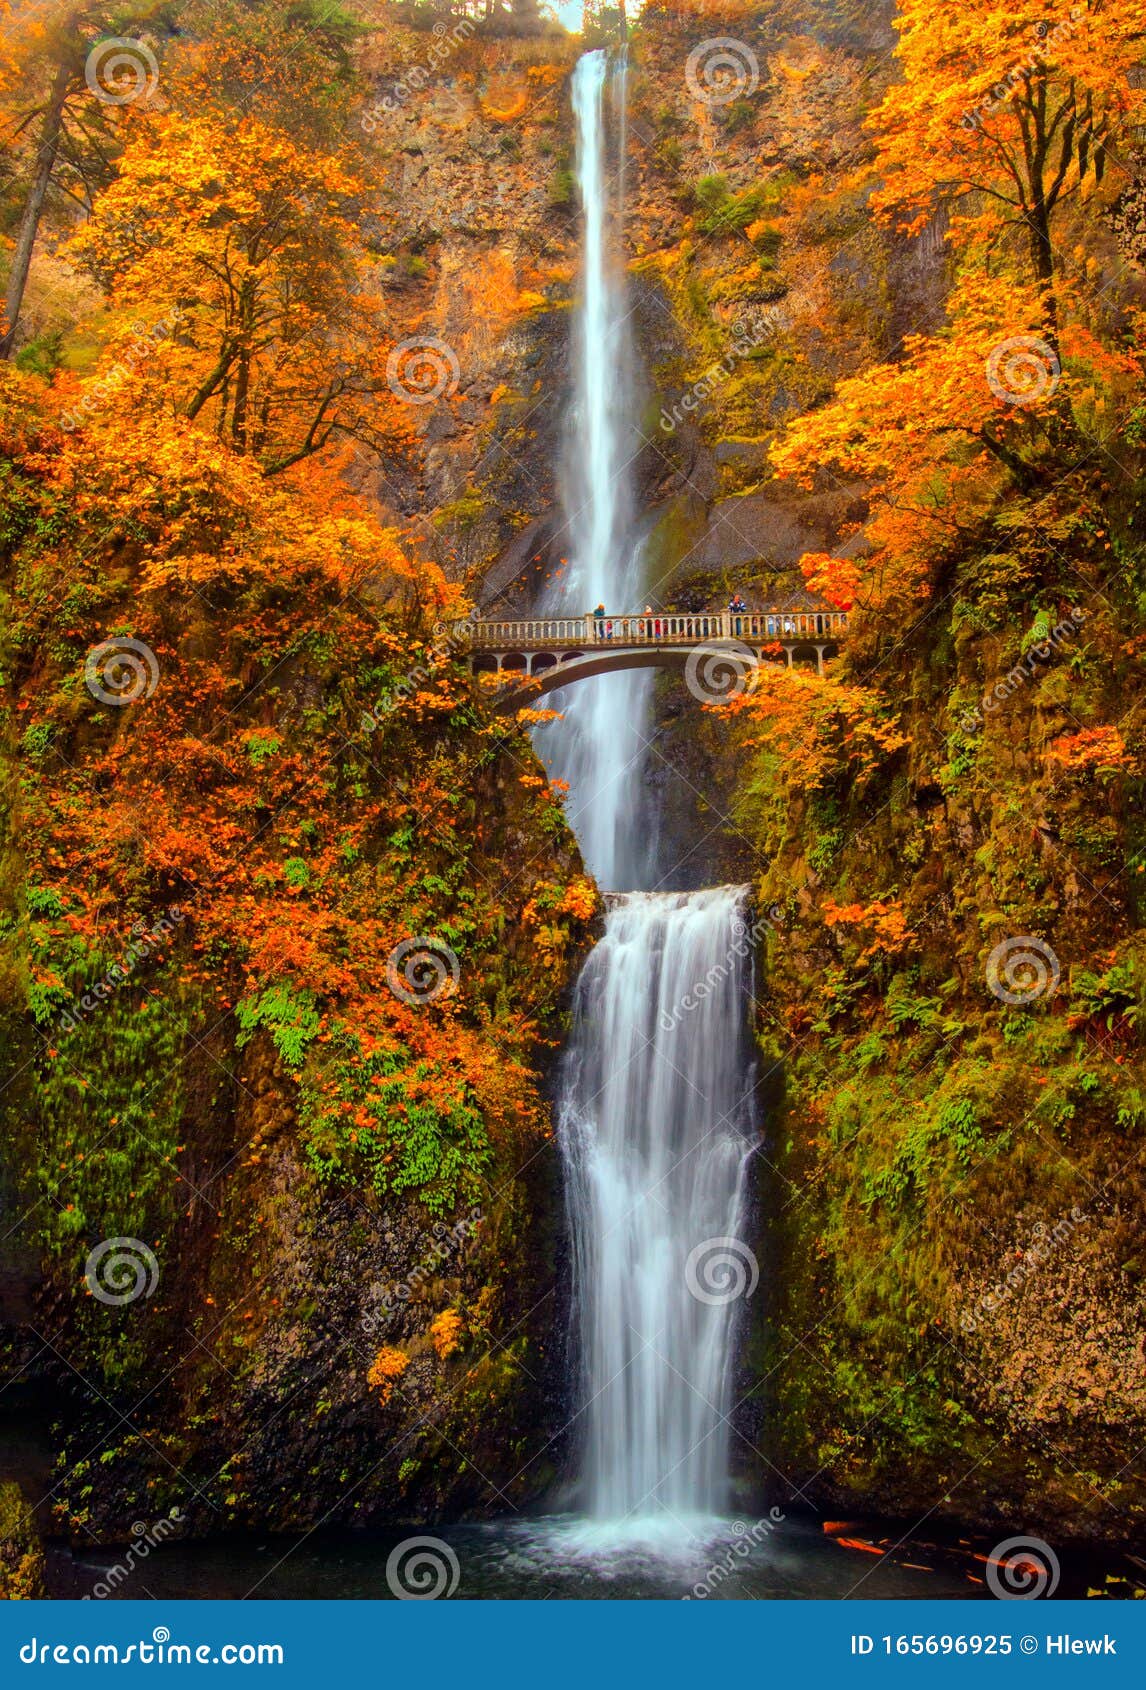 multnomah falls in the columbia river gorge of oregon with beautiful fall colors.